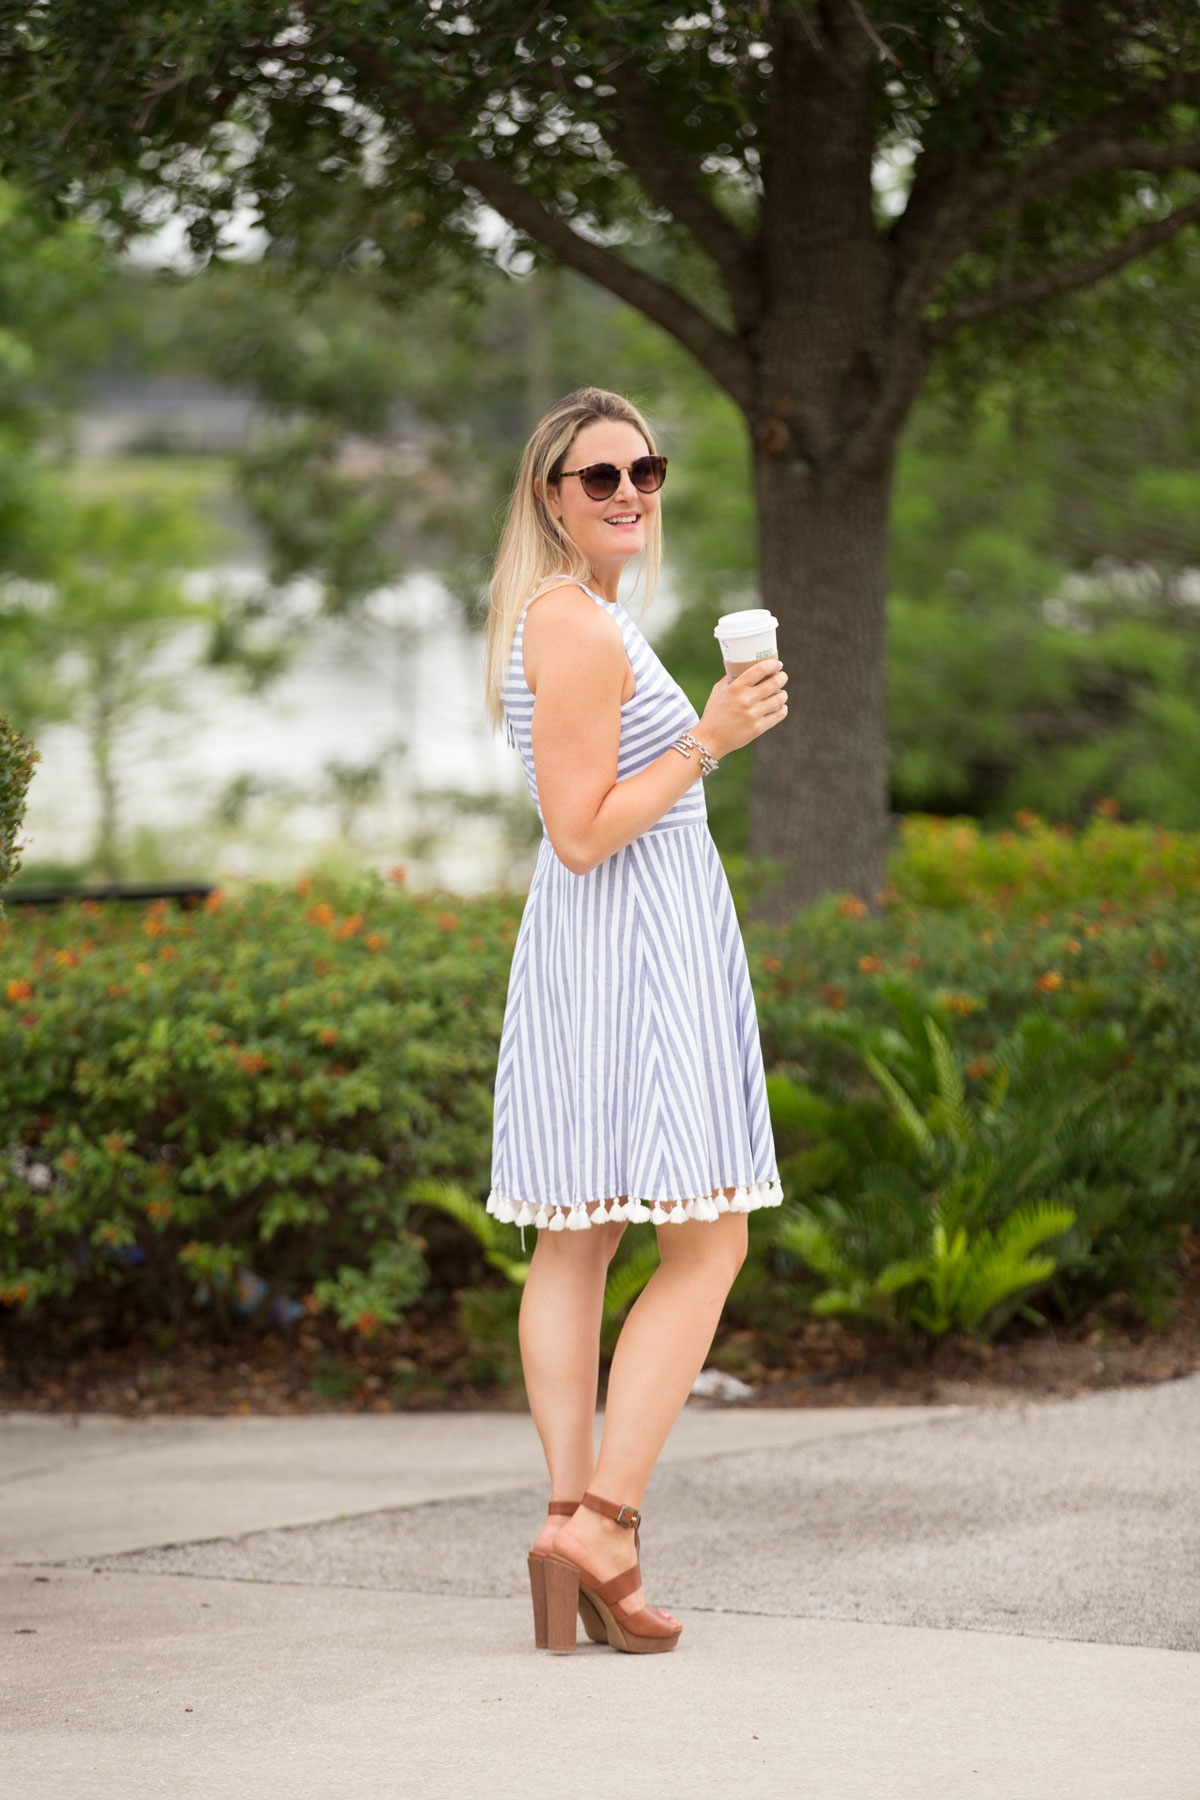 Florida lifestyle blogger, MikaelaJ, shares a beautiful dress lined with tassels. Check out this unique dress now!